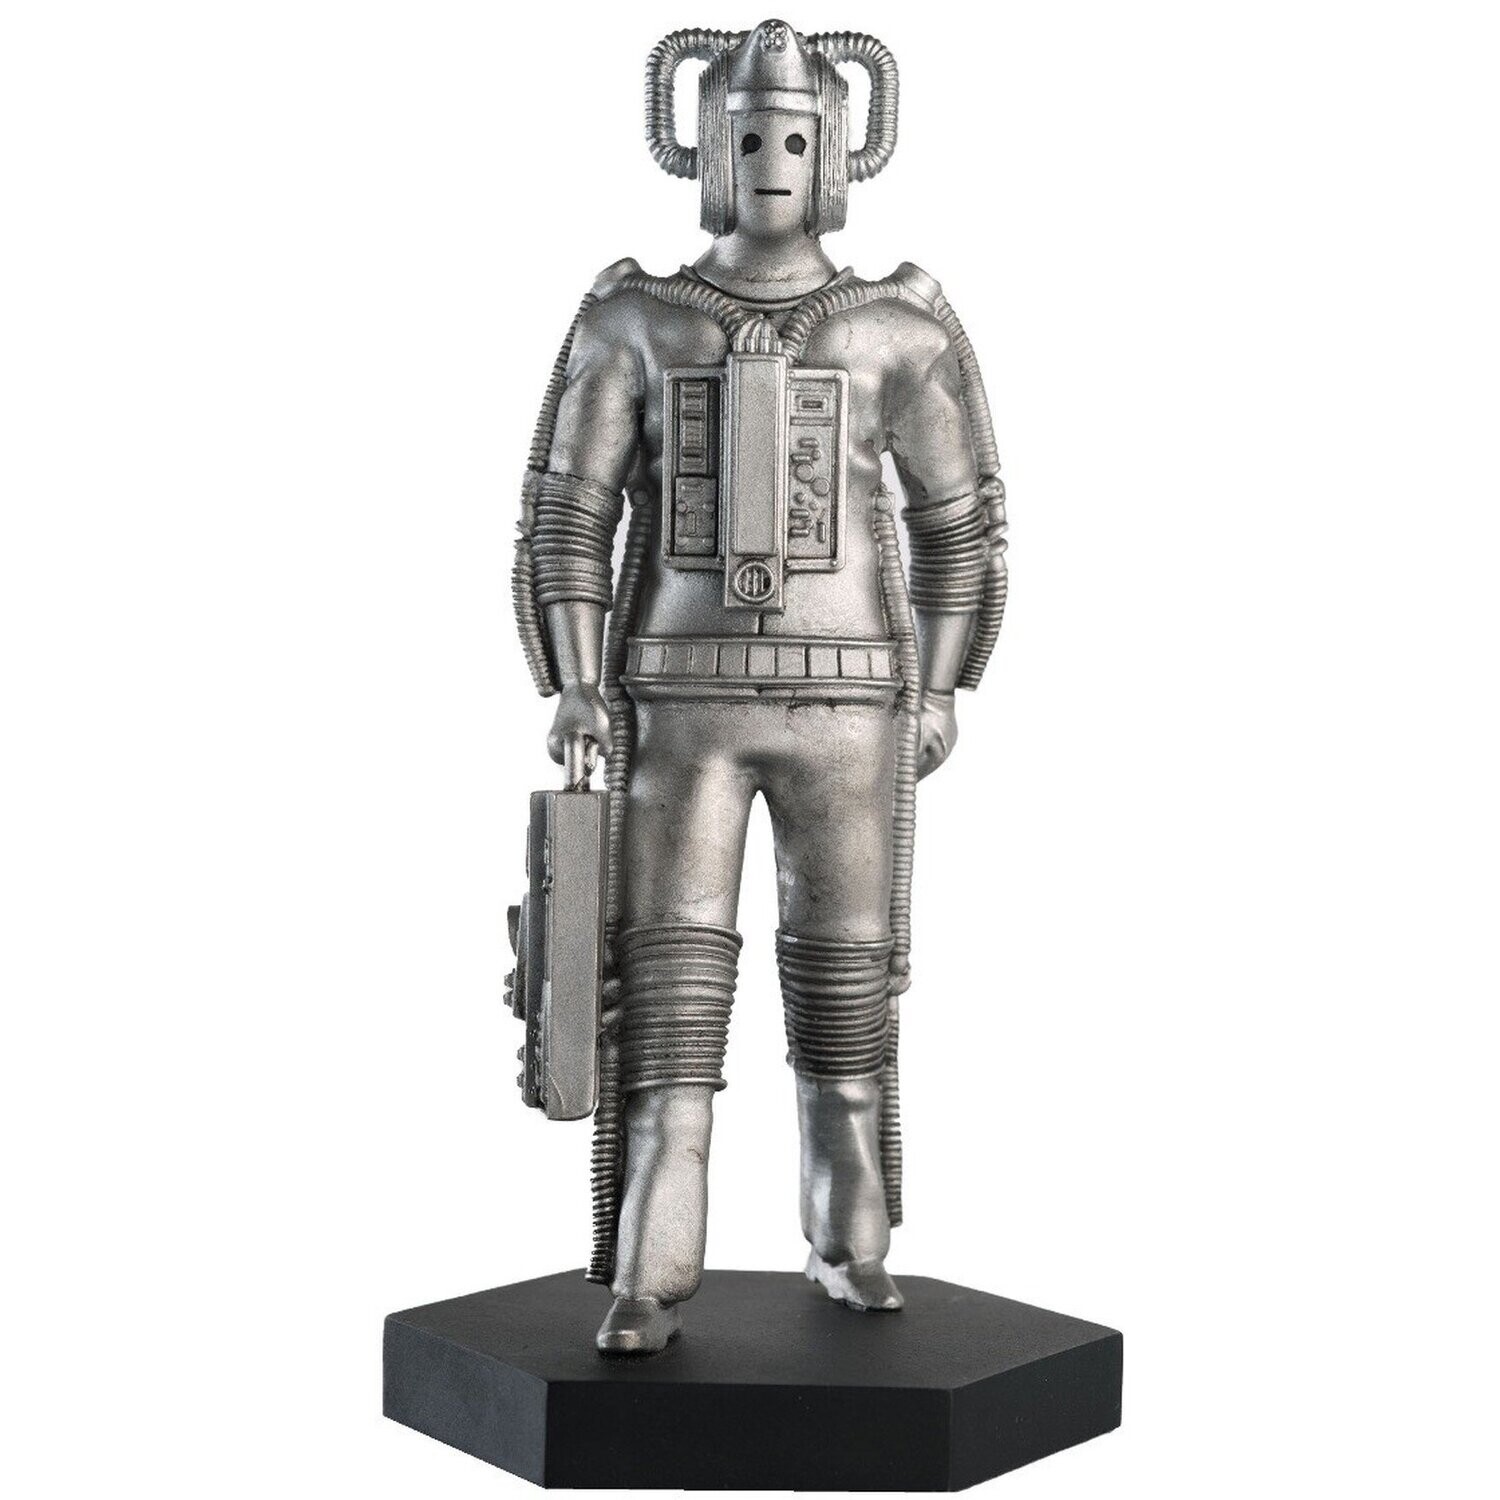 Cyberman (Revenge of the Cybermen) Figurine - 1:21 Scale - Includes 20 Page Magazine of the Classic Episode